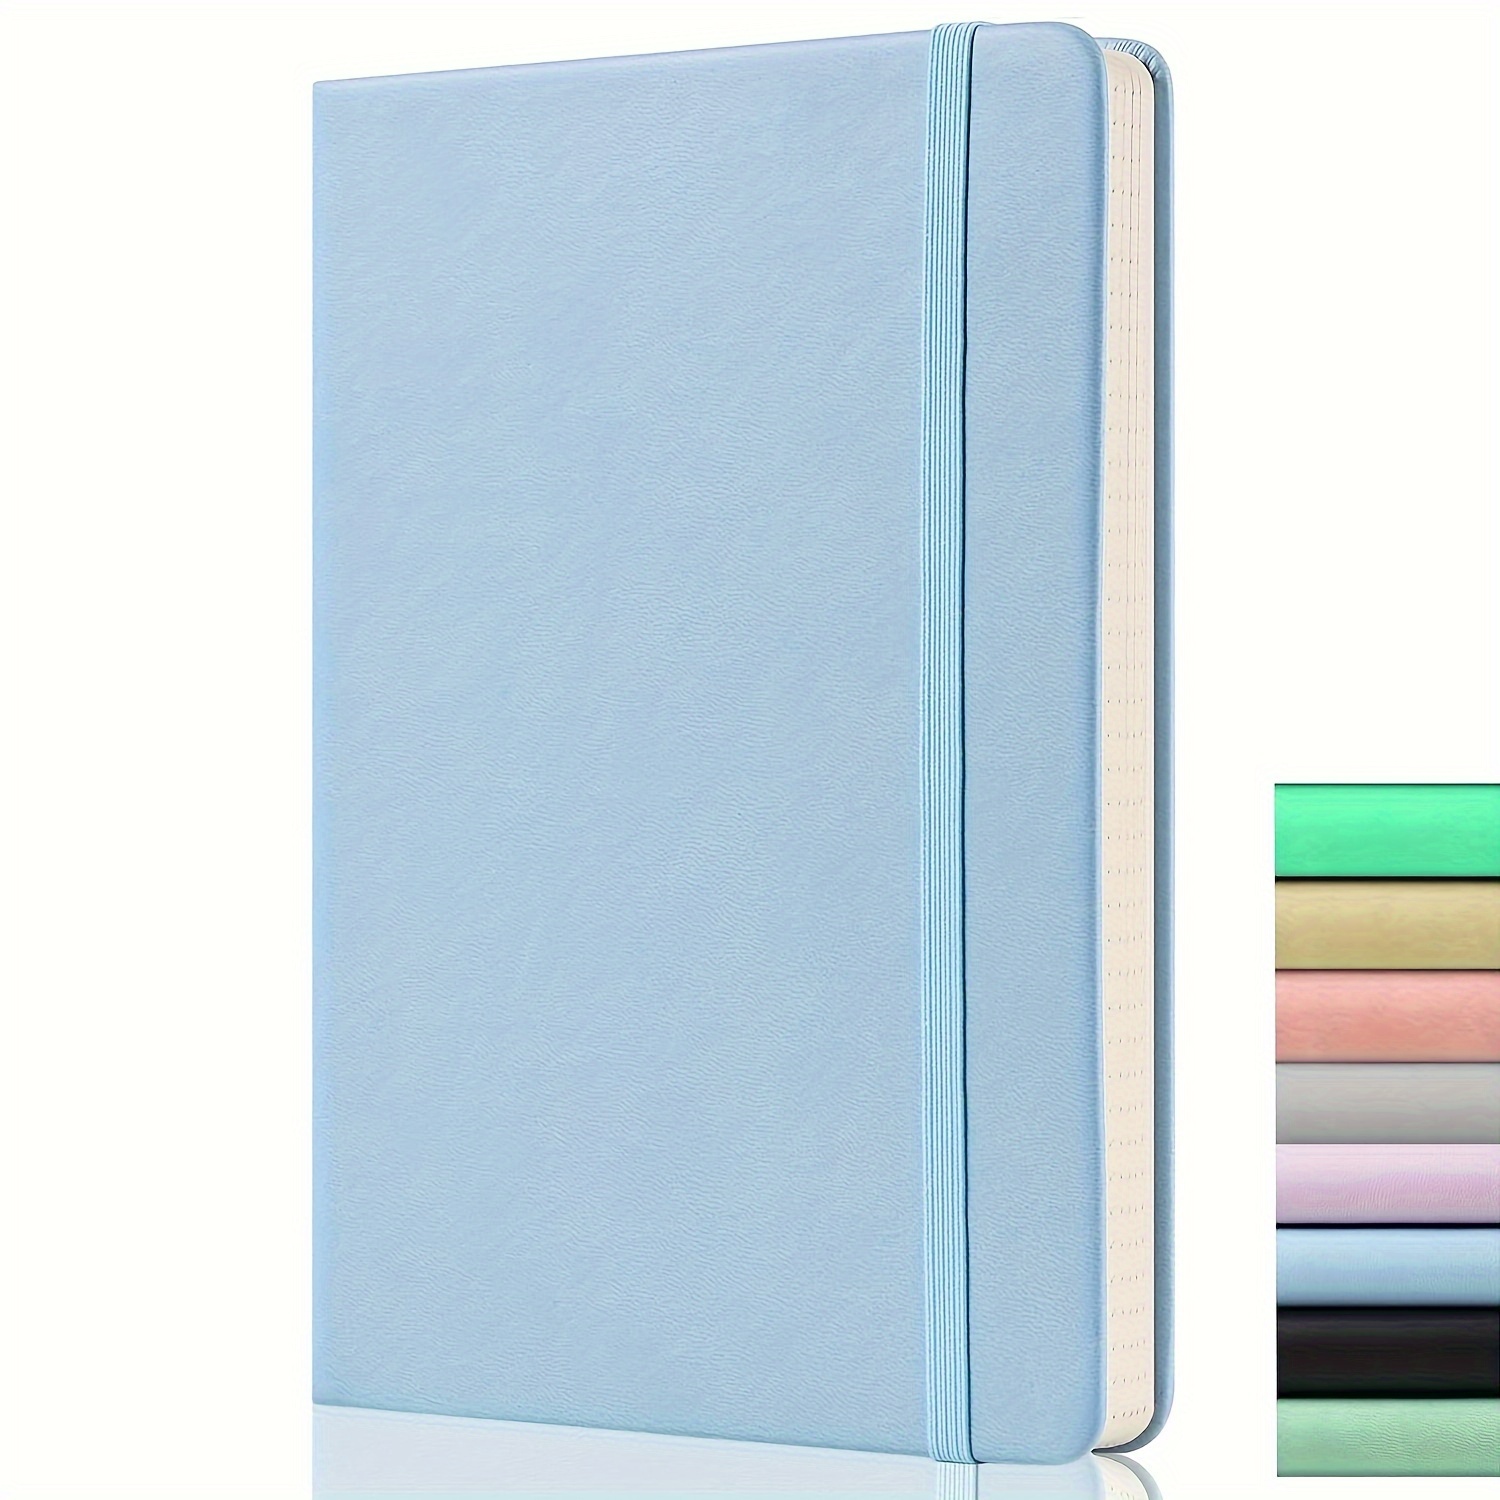 

A5 Notebook - 120gsm Premium Thick Paper, 172 Pages, Faux Leather Cover, Expandable Pocket, Elastic Closure, 2 Bookmark Ribbons, Luxury Hardcover